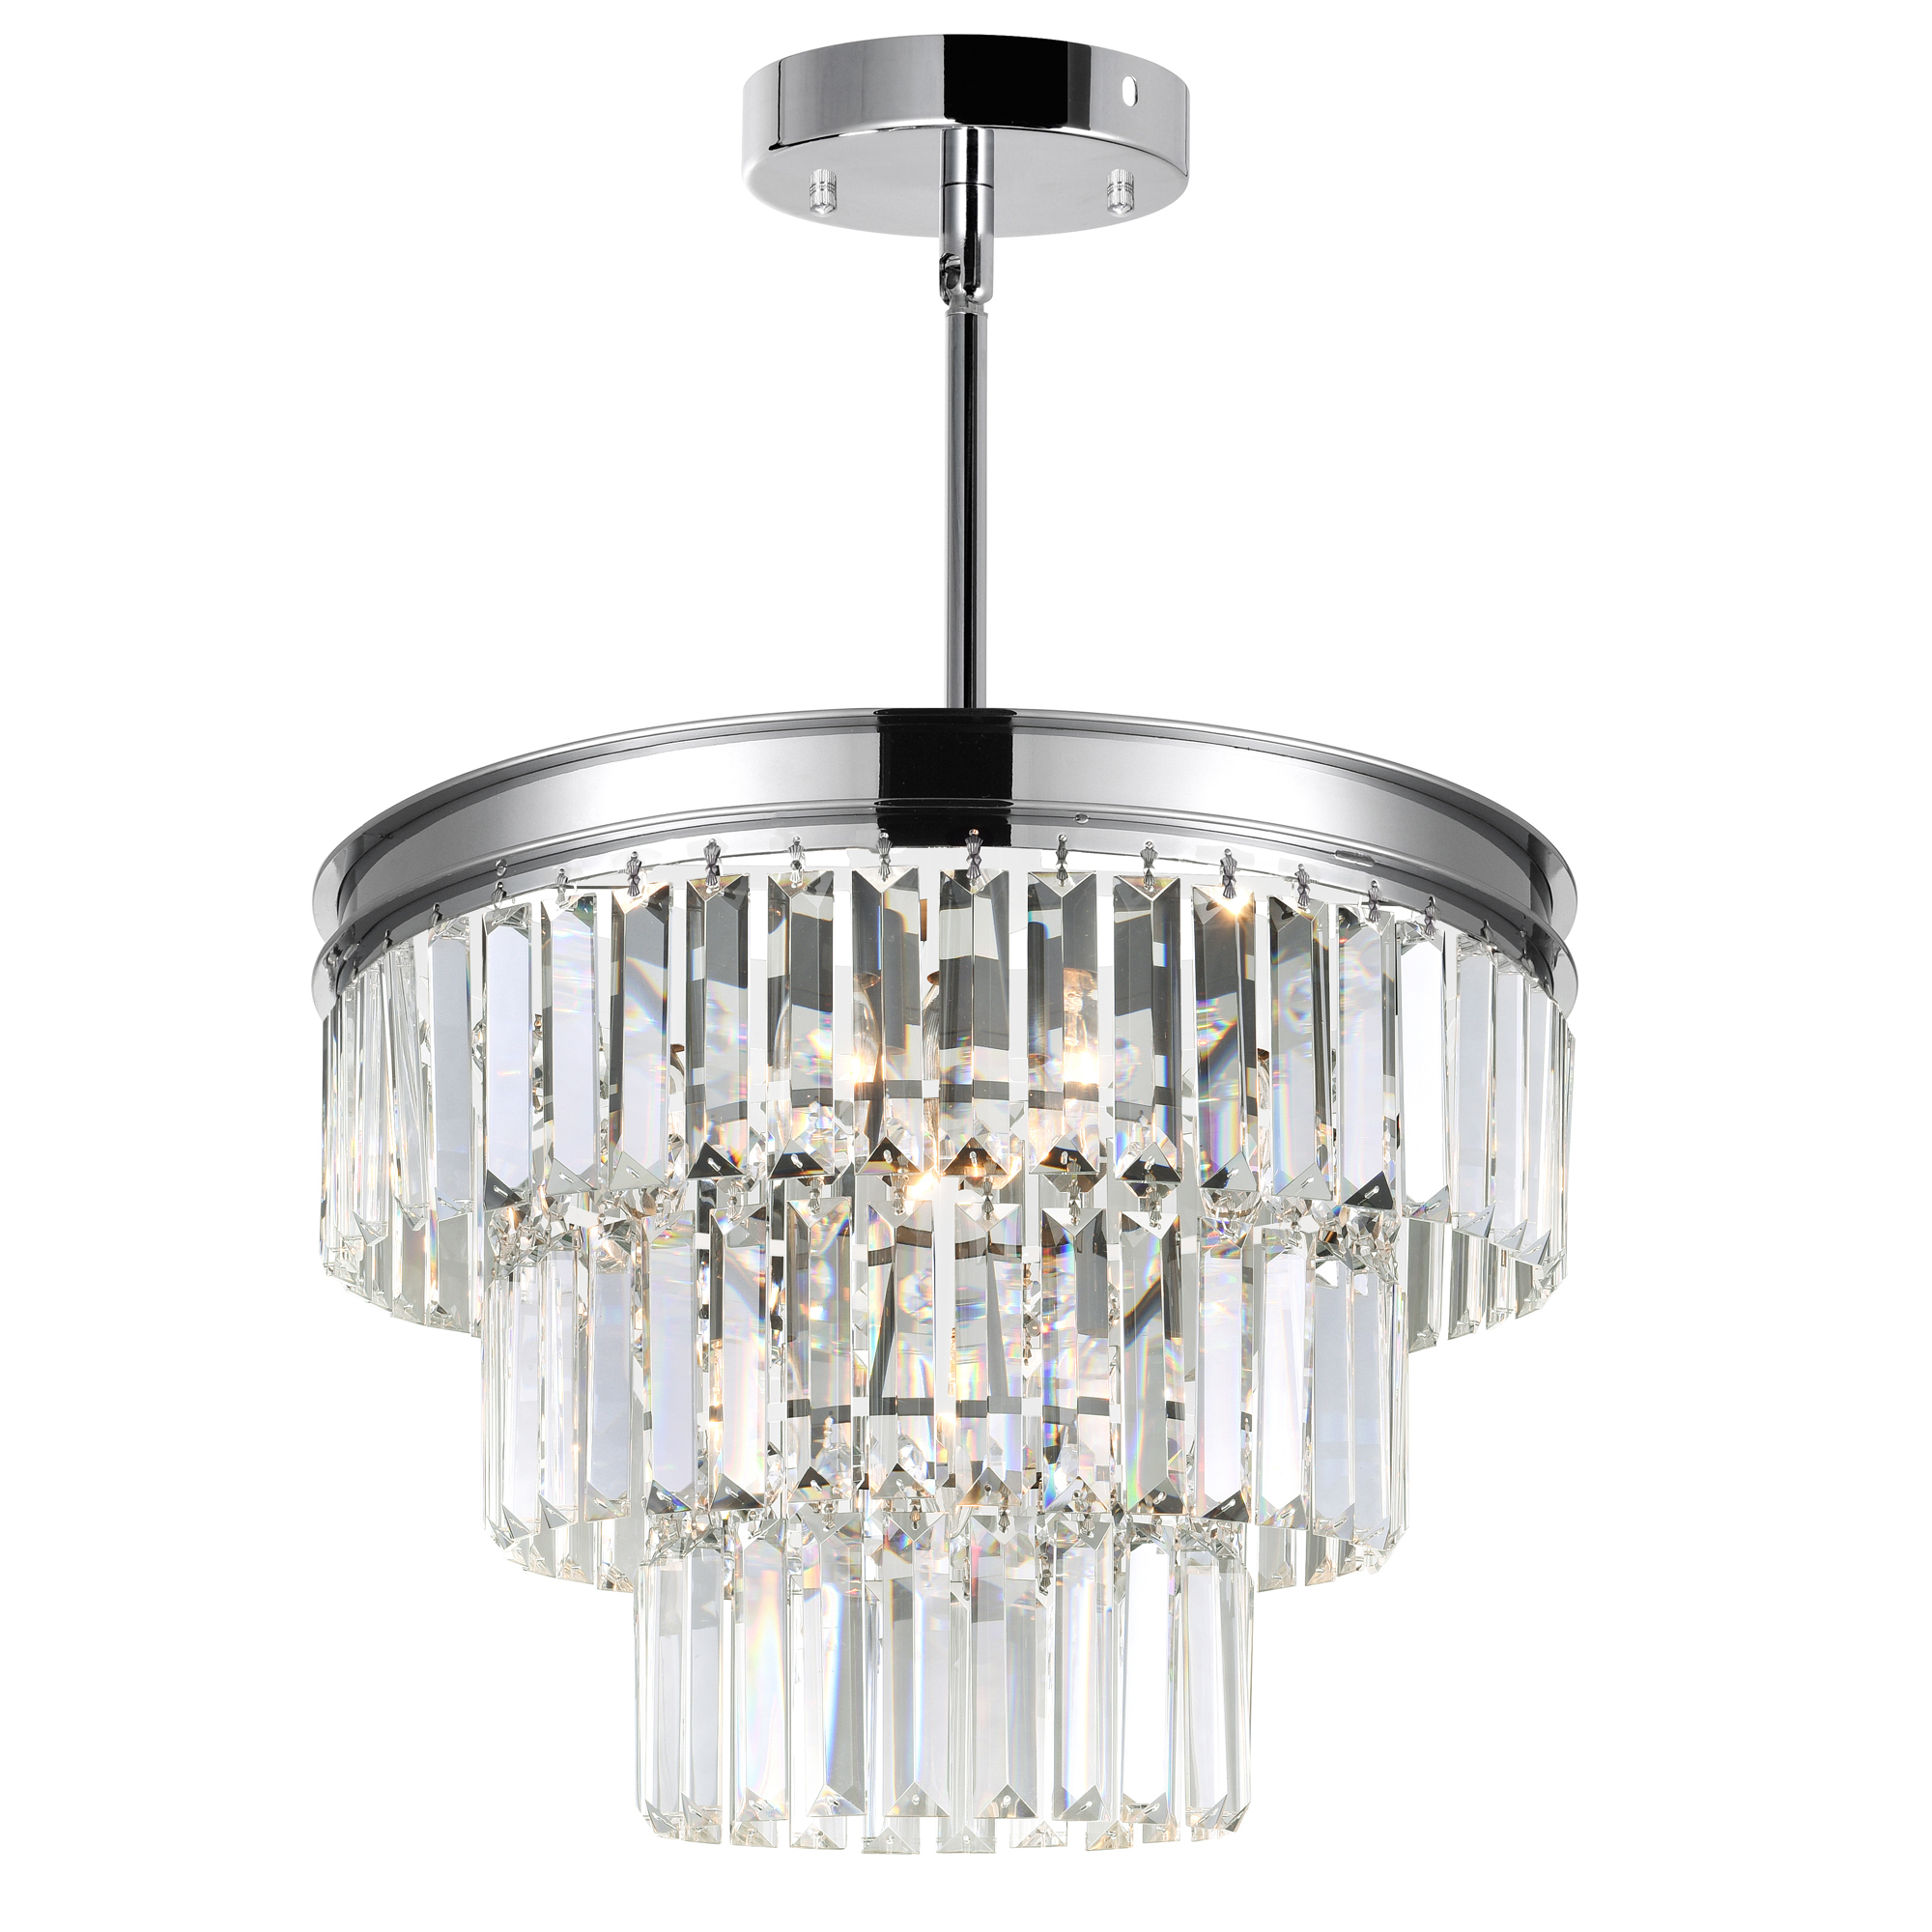 Weiss 5 Light Down Chandelier With Chrome Finish